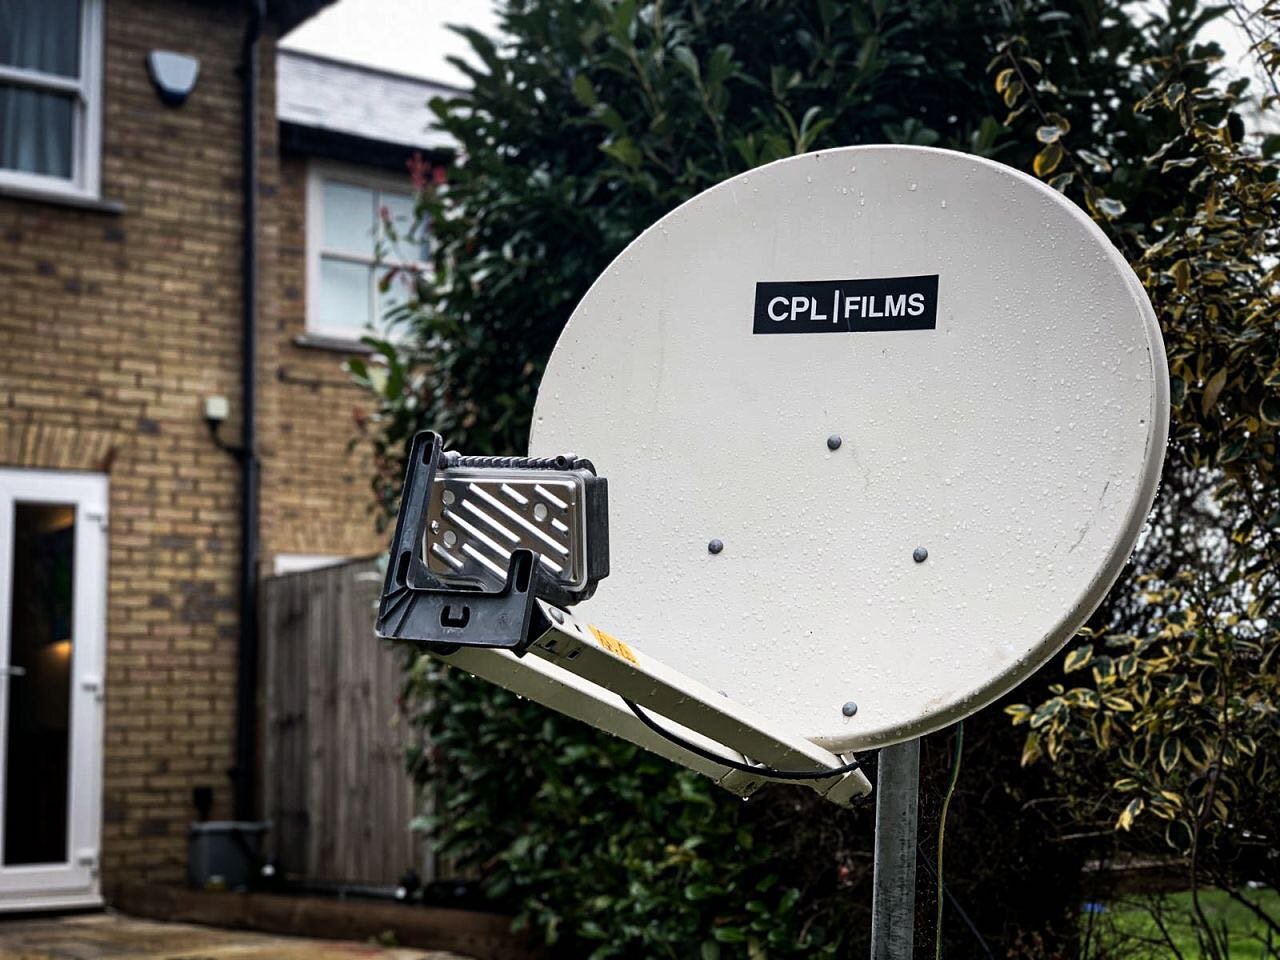 We're never offline - Busy week testing hardware ahead of a remote video job that will heavily rely on our un-contended broadcast satellite connectivity epically when 4G/LTE isn't available we turn to the sky for answers. 📡📶

#kasat #remotebroadcas